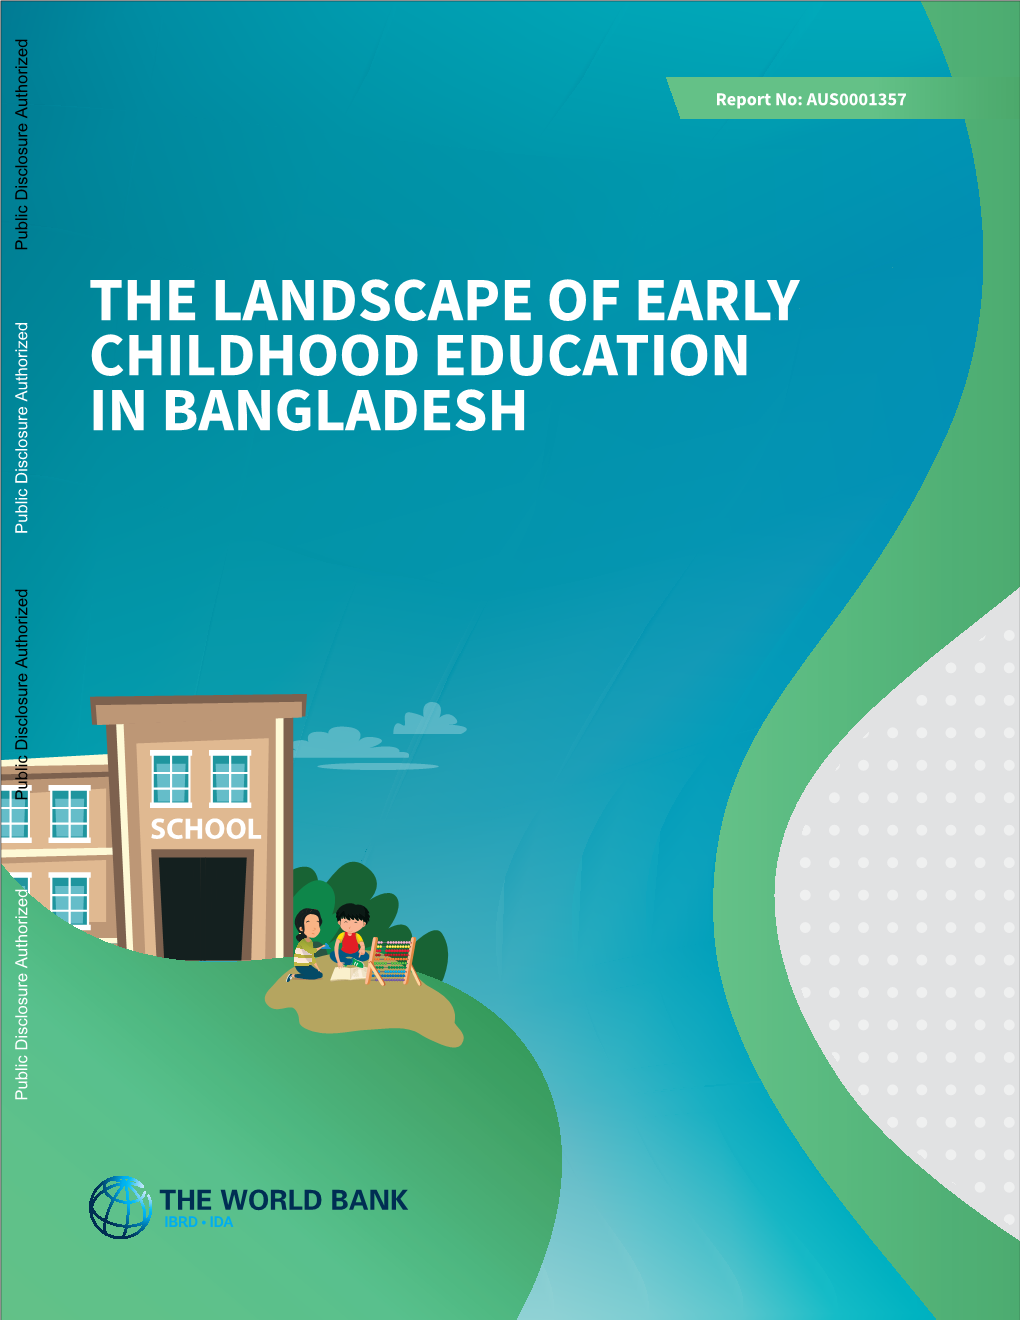 School the Landscape of Early Childhood